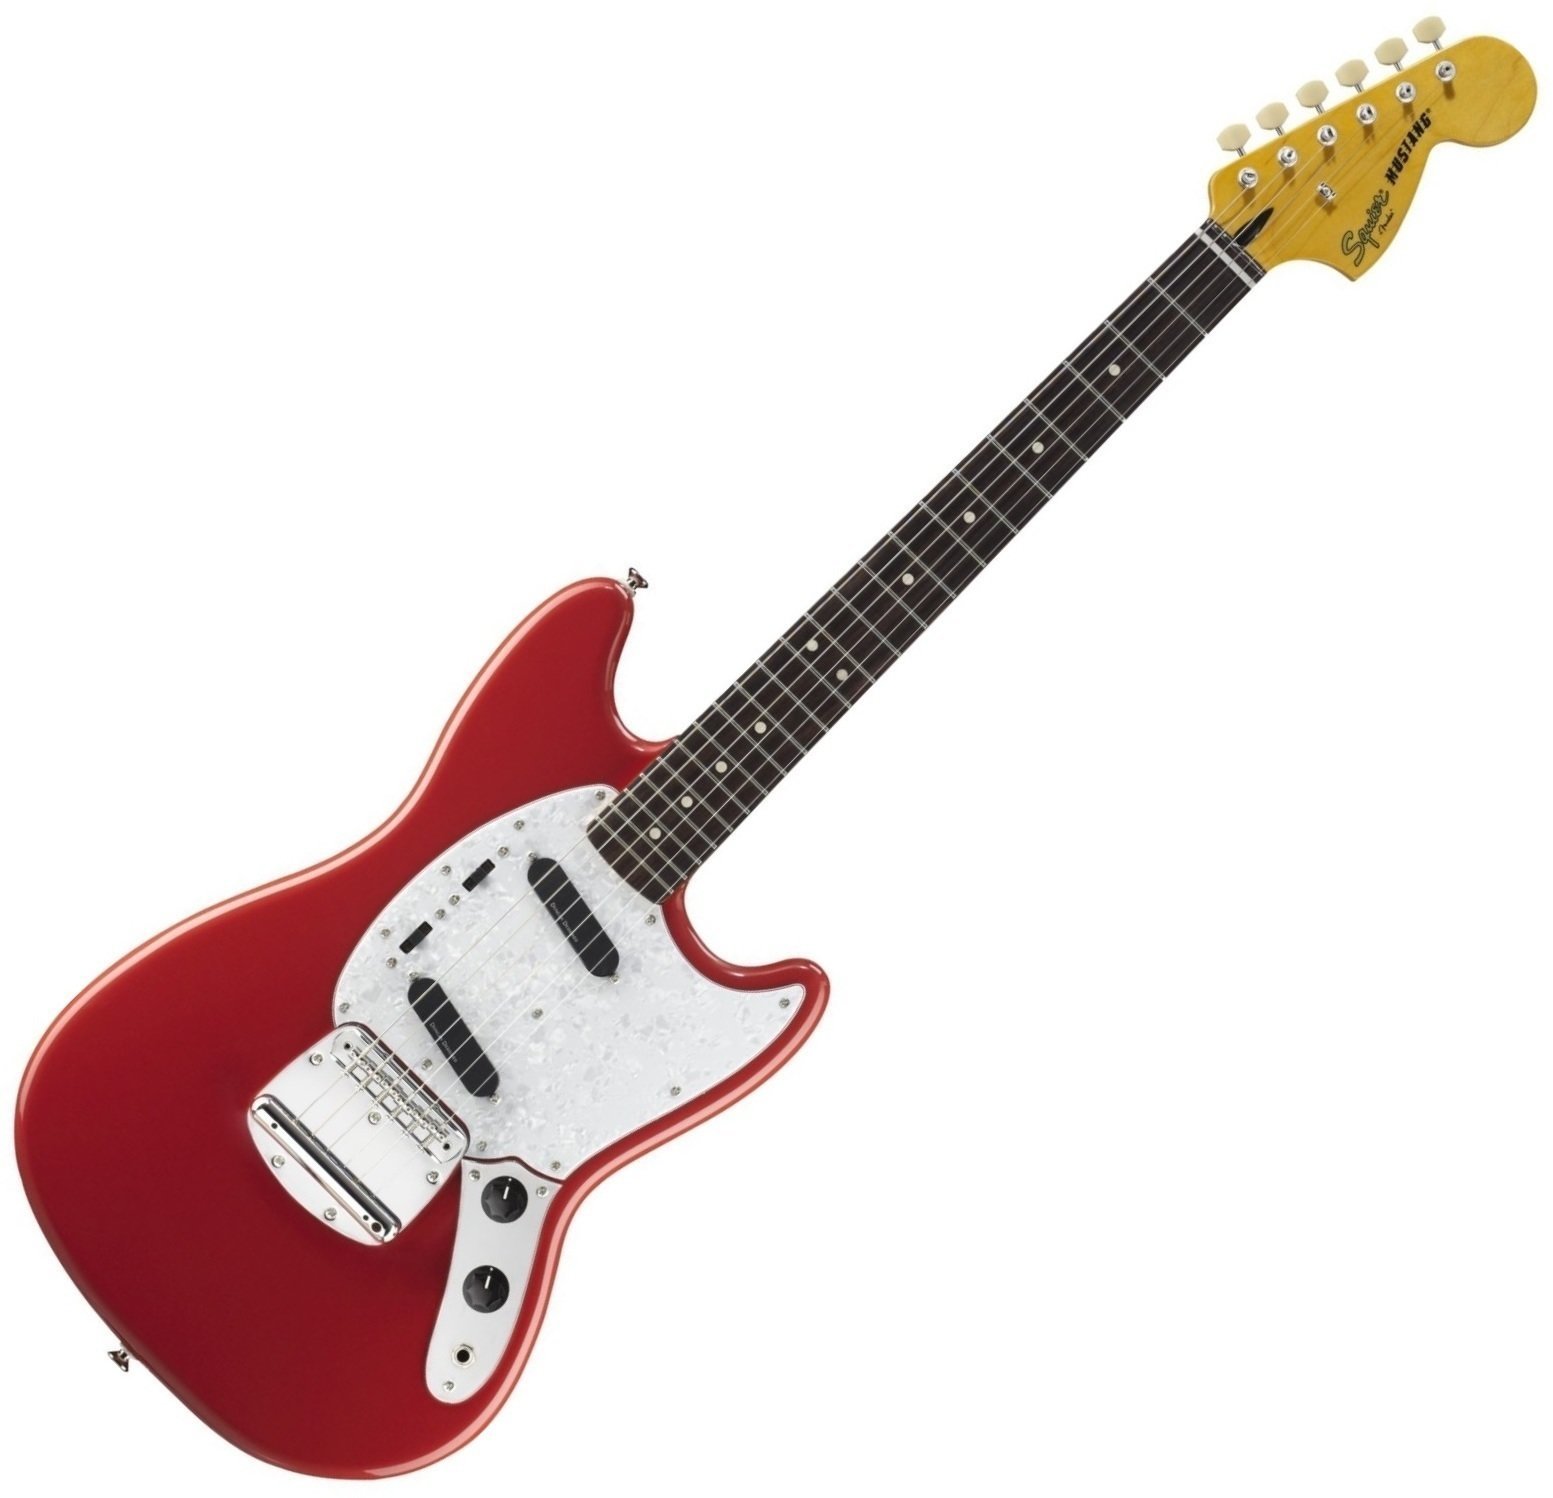 Electric guitar Fender Squier Vintage Modified Mustang IL Fiesta Red